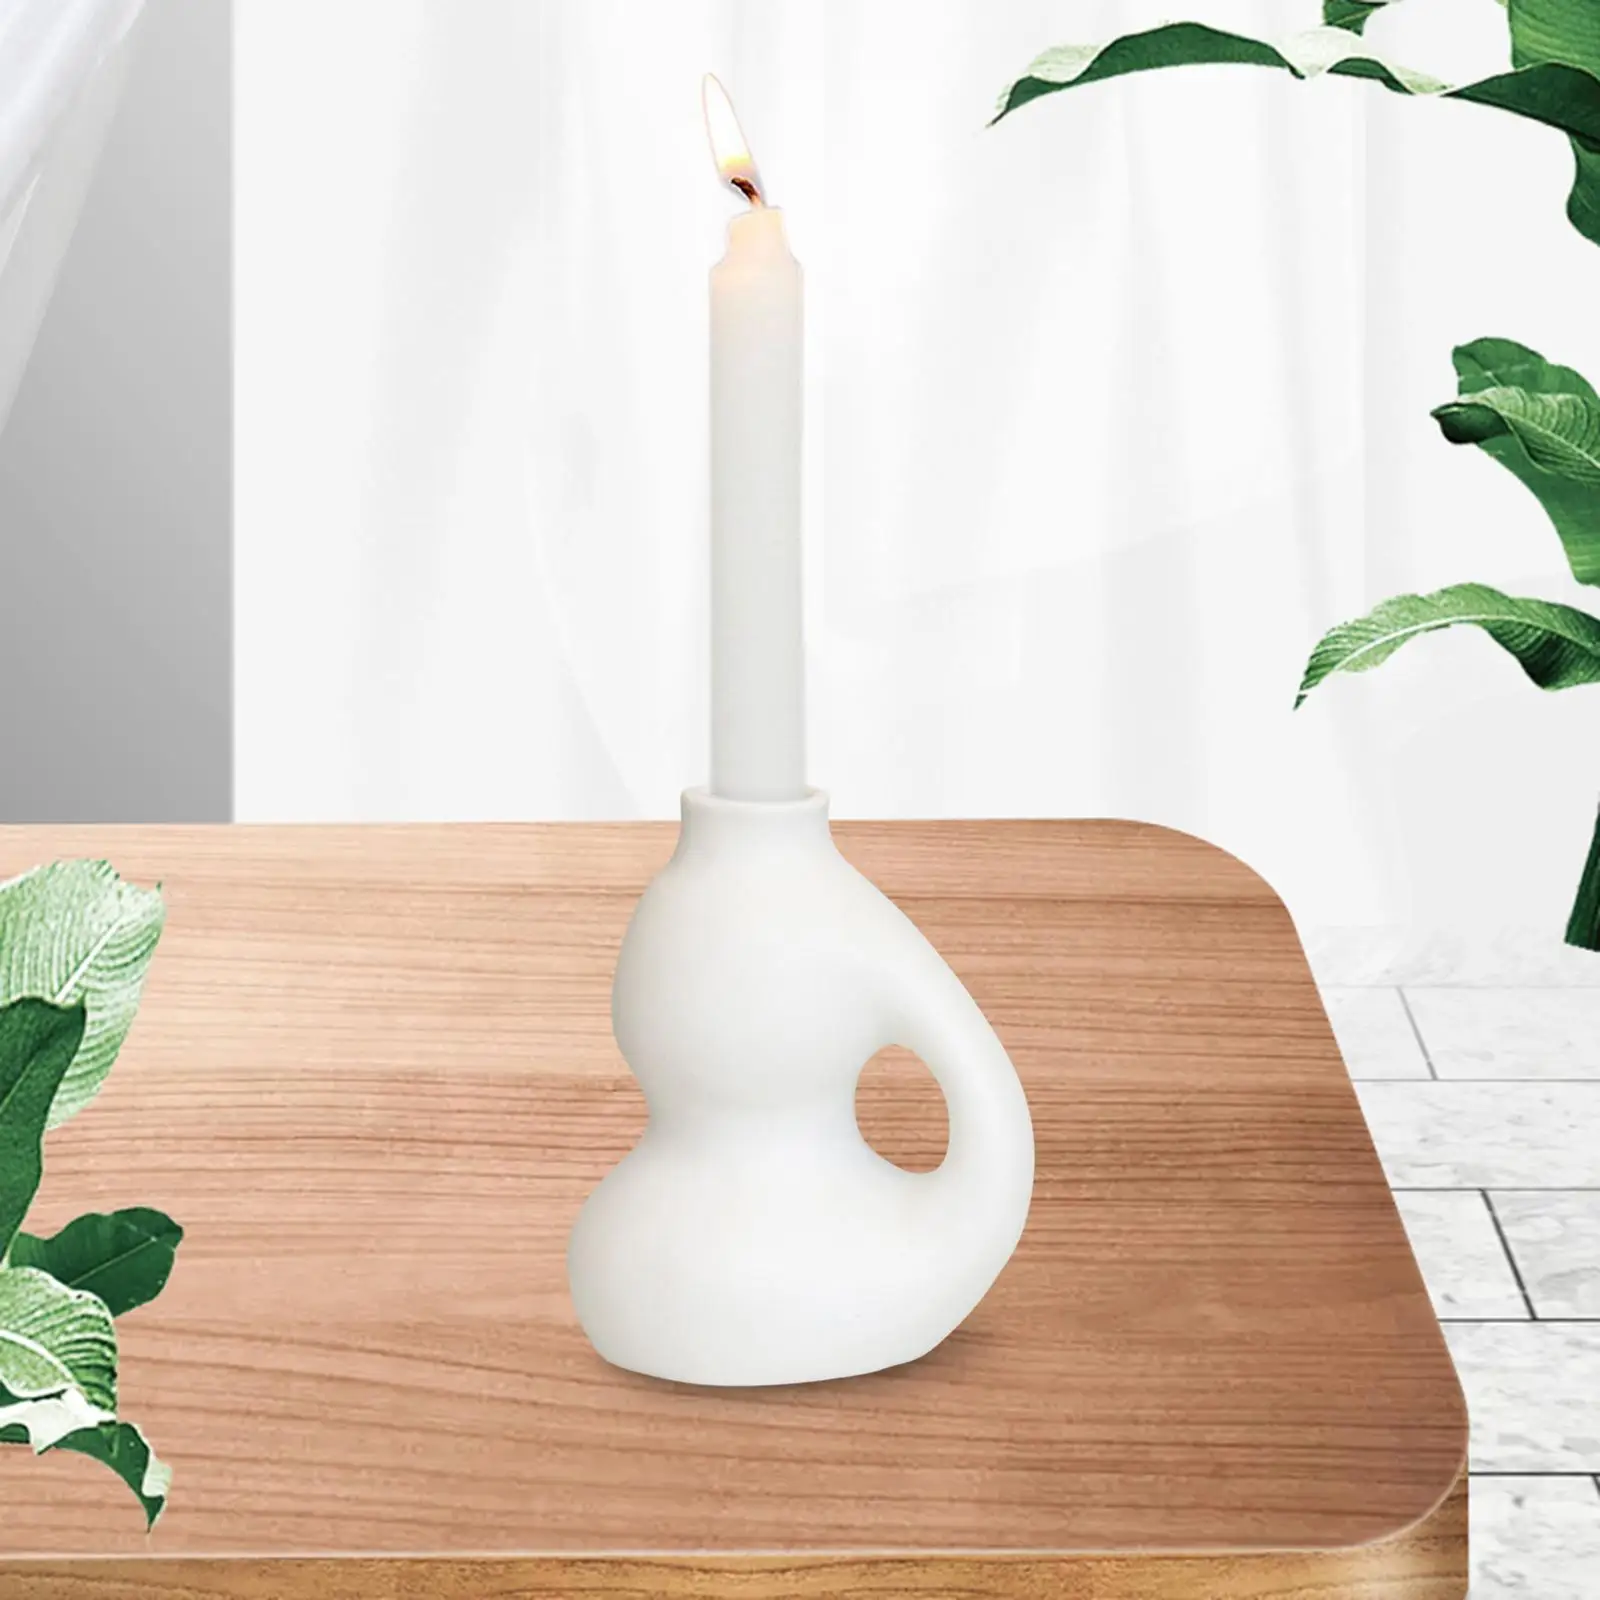 Nordic Candle Holder Candlestick Centerpieces Pillar Vase Candle for Holiday Dining Table Decor